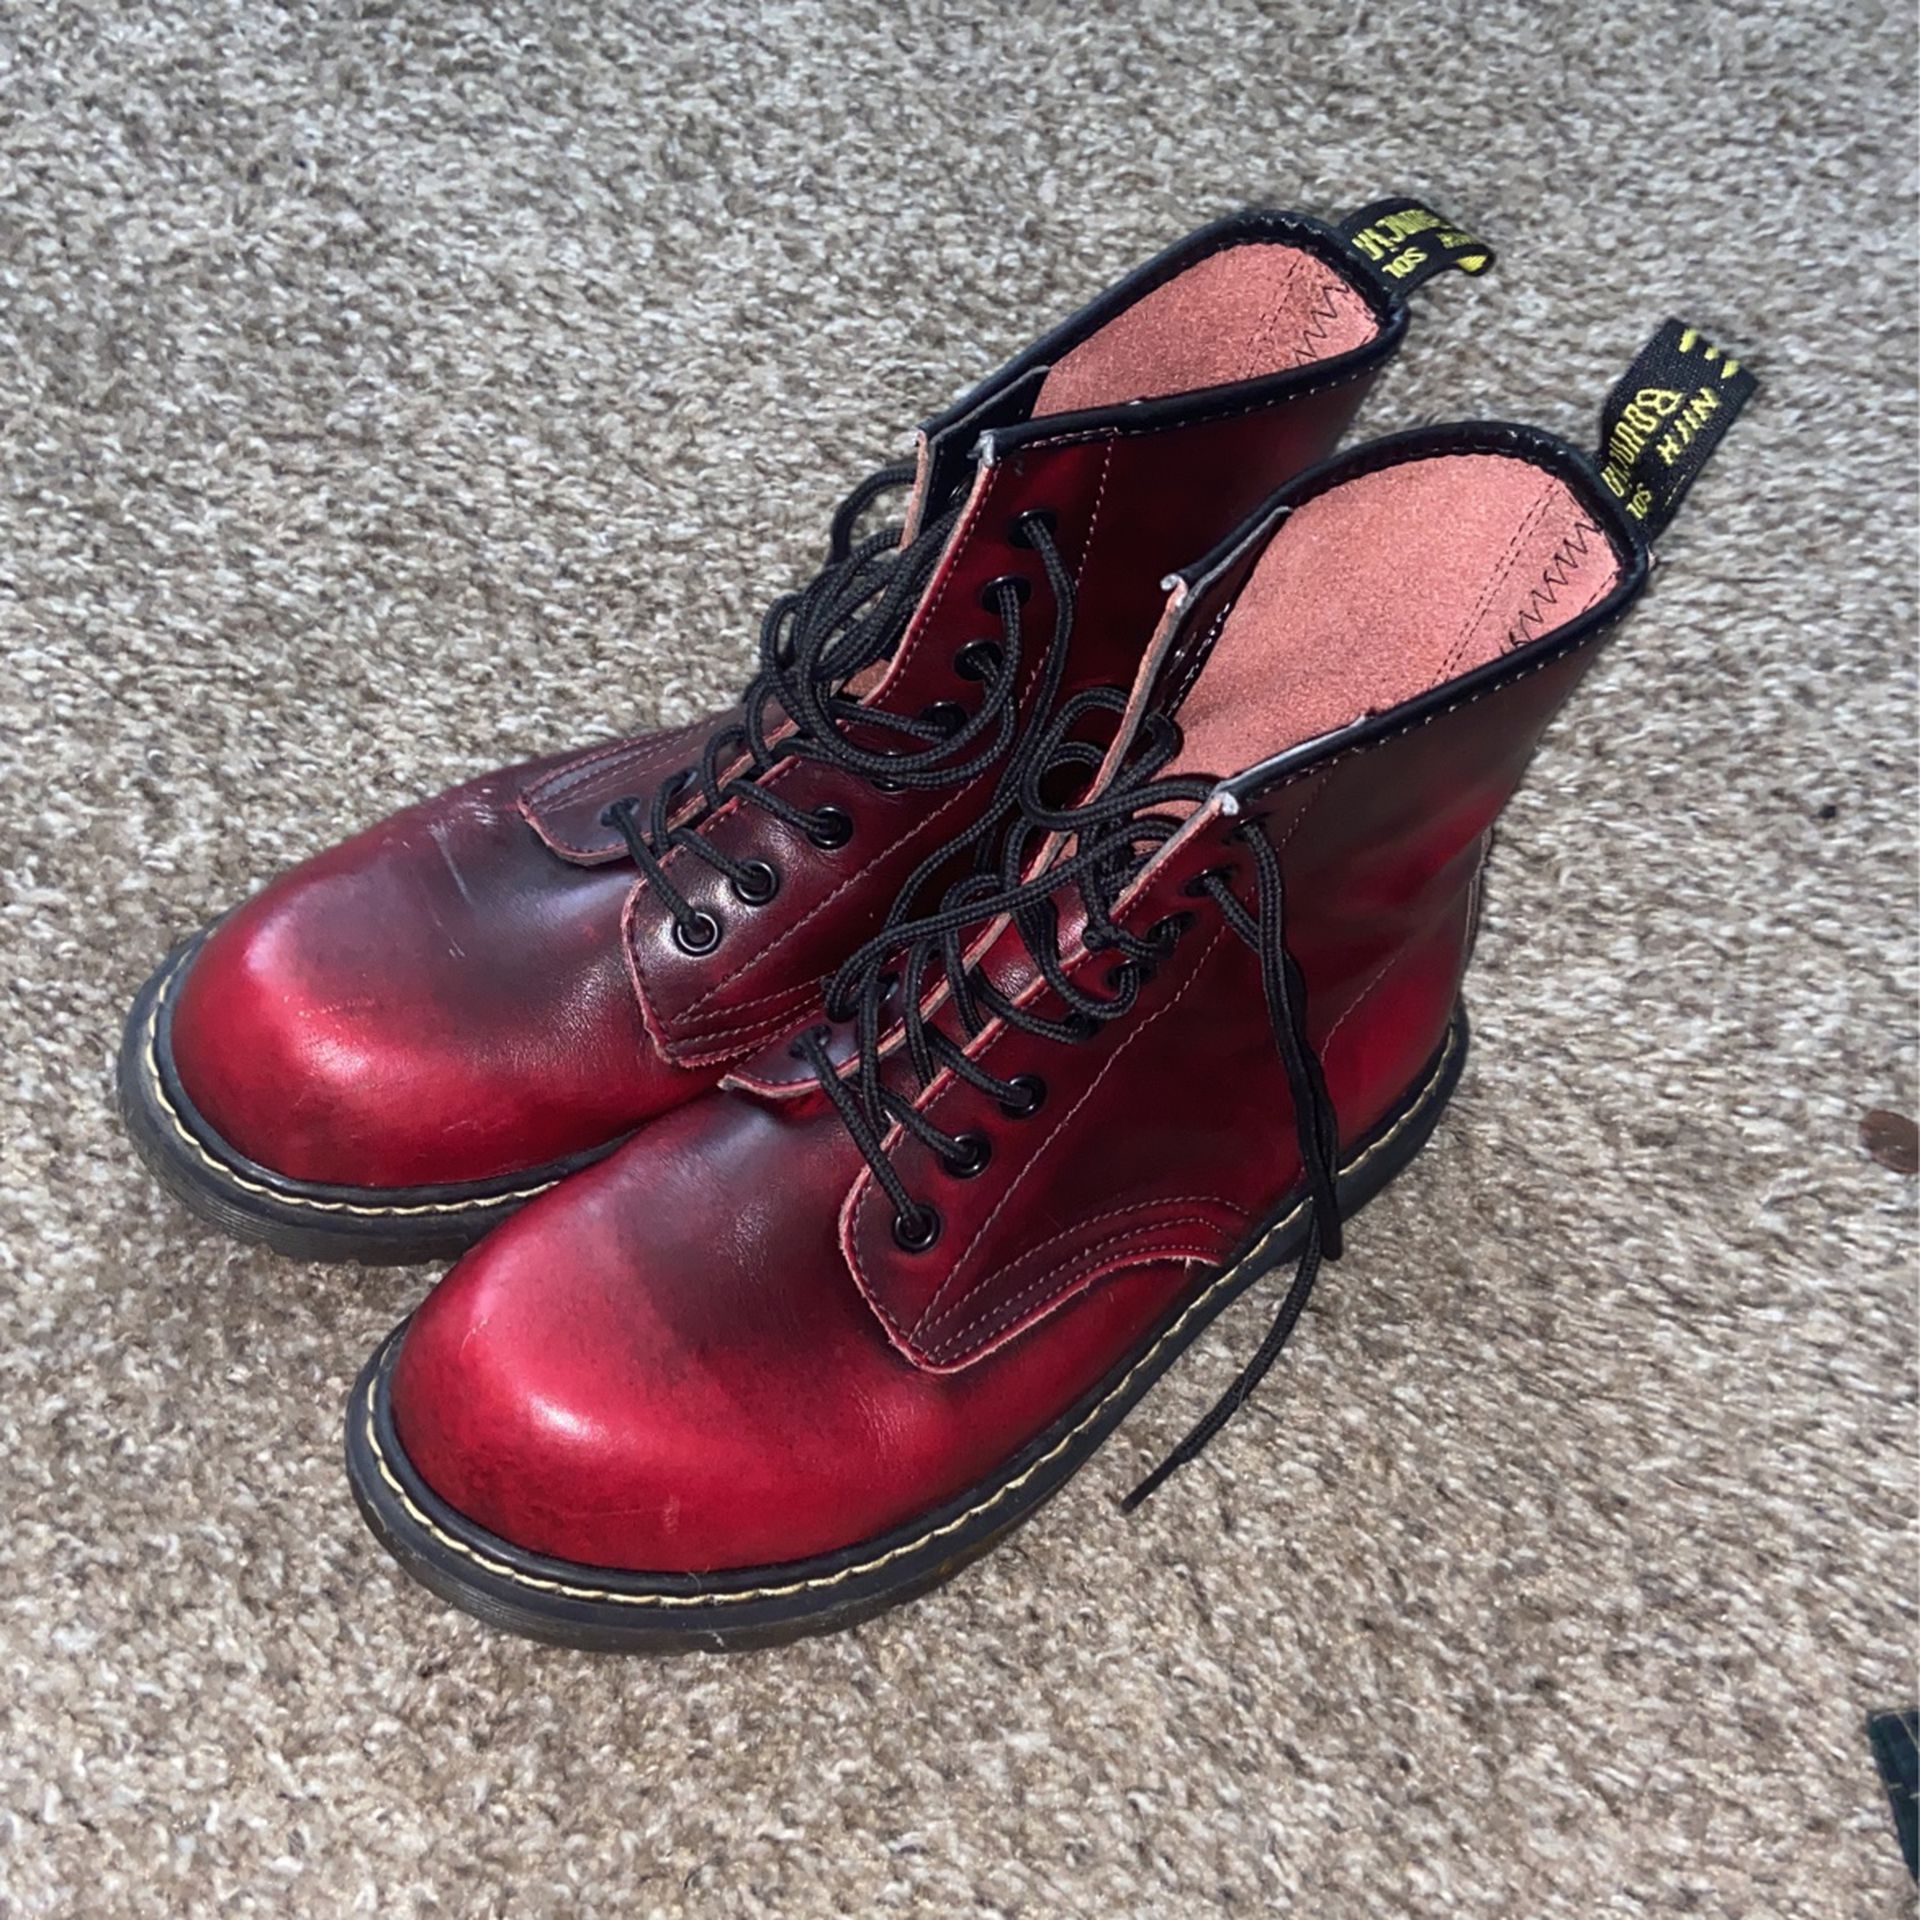 Marke Niih Bouncing Soles Lace Up Boots for Sale in Moreno Valley, CA ...